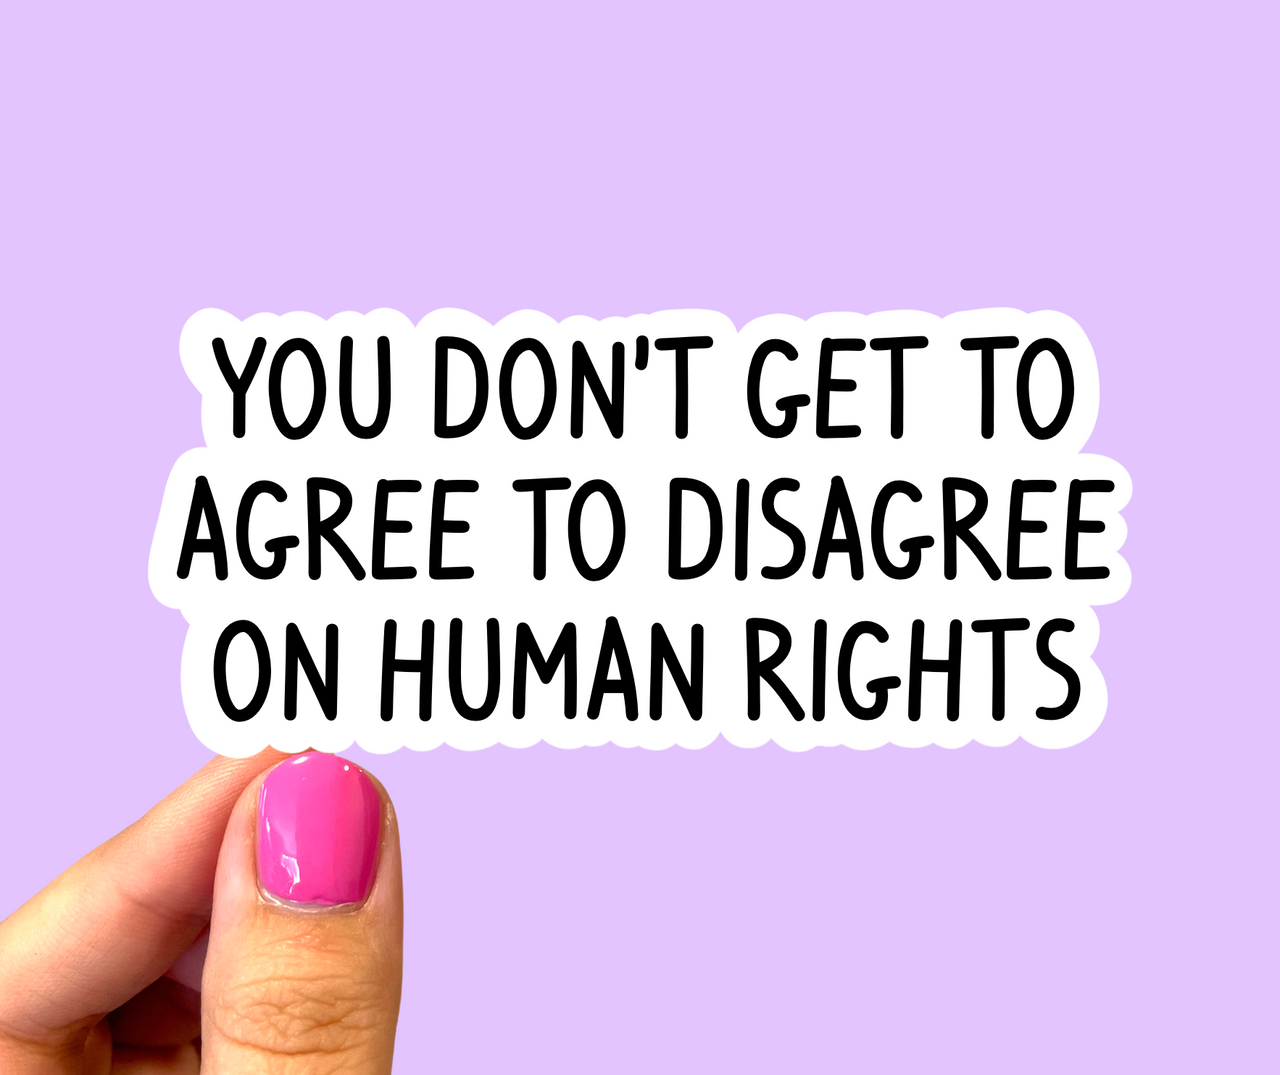 You don’t get to agree to disagree on human rights